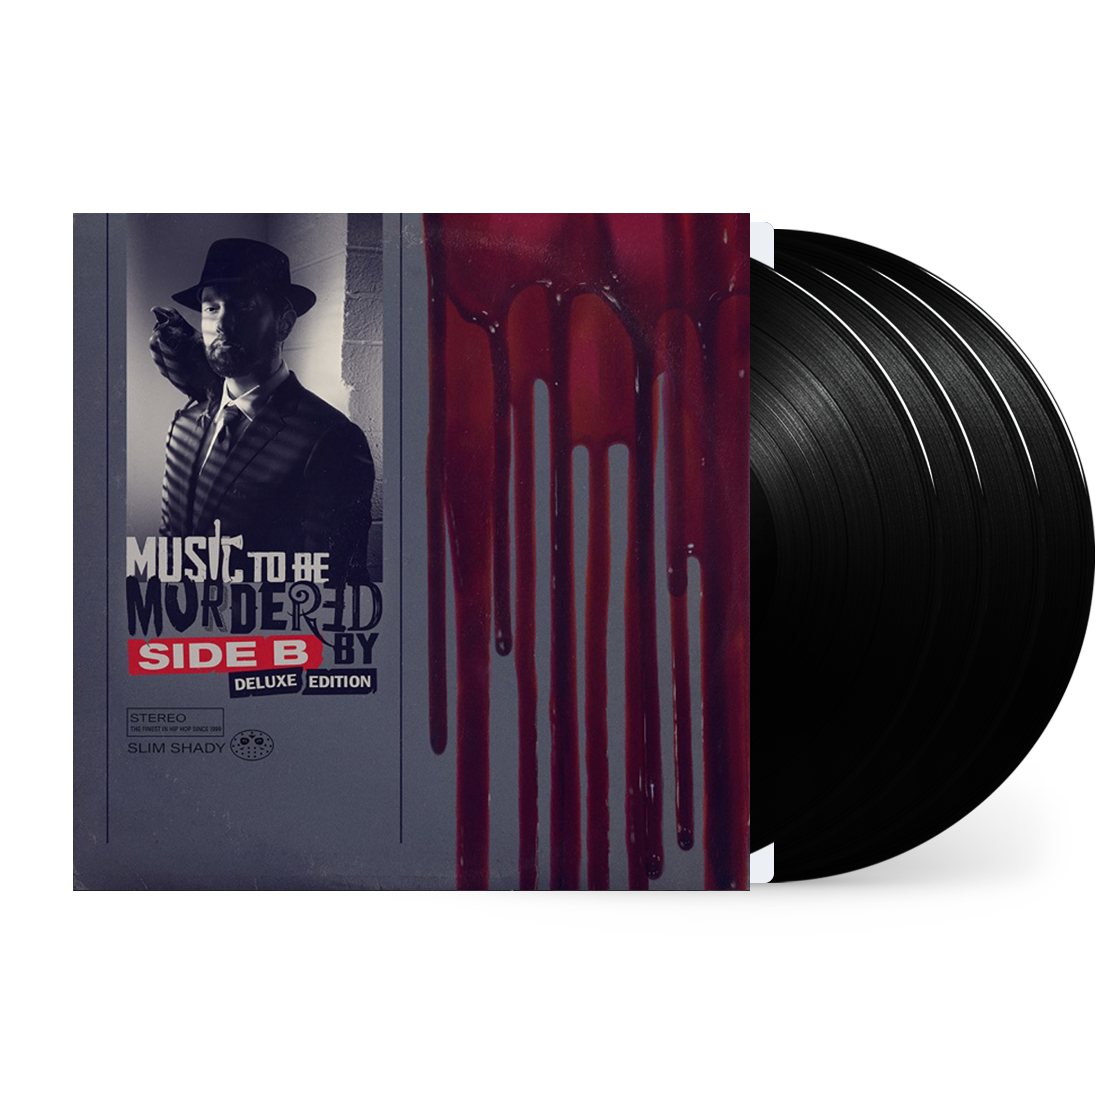 Eminem - Music To Be Murdered By - Side B (Deluxe Edition): Vinyl 4LP